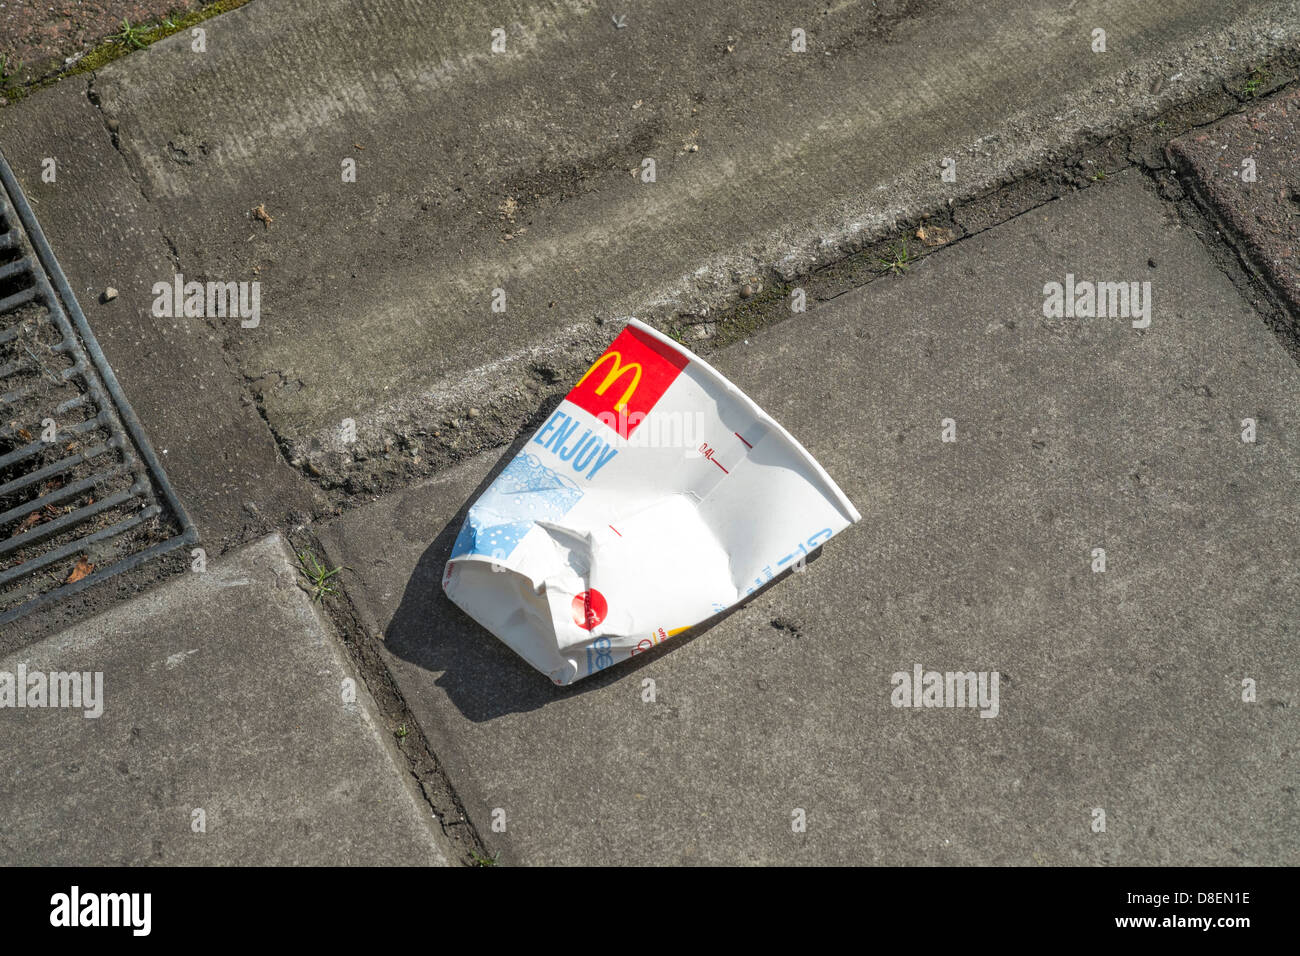 Discarded and crushed McDonalds paper cup on the pavement Stock Photo